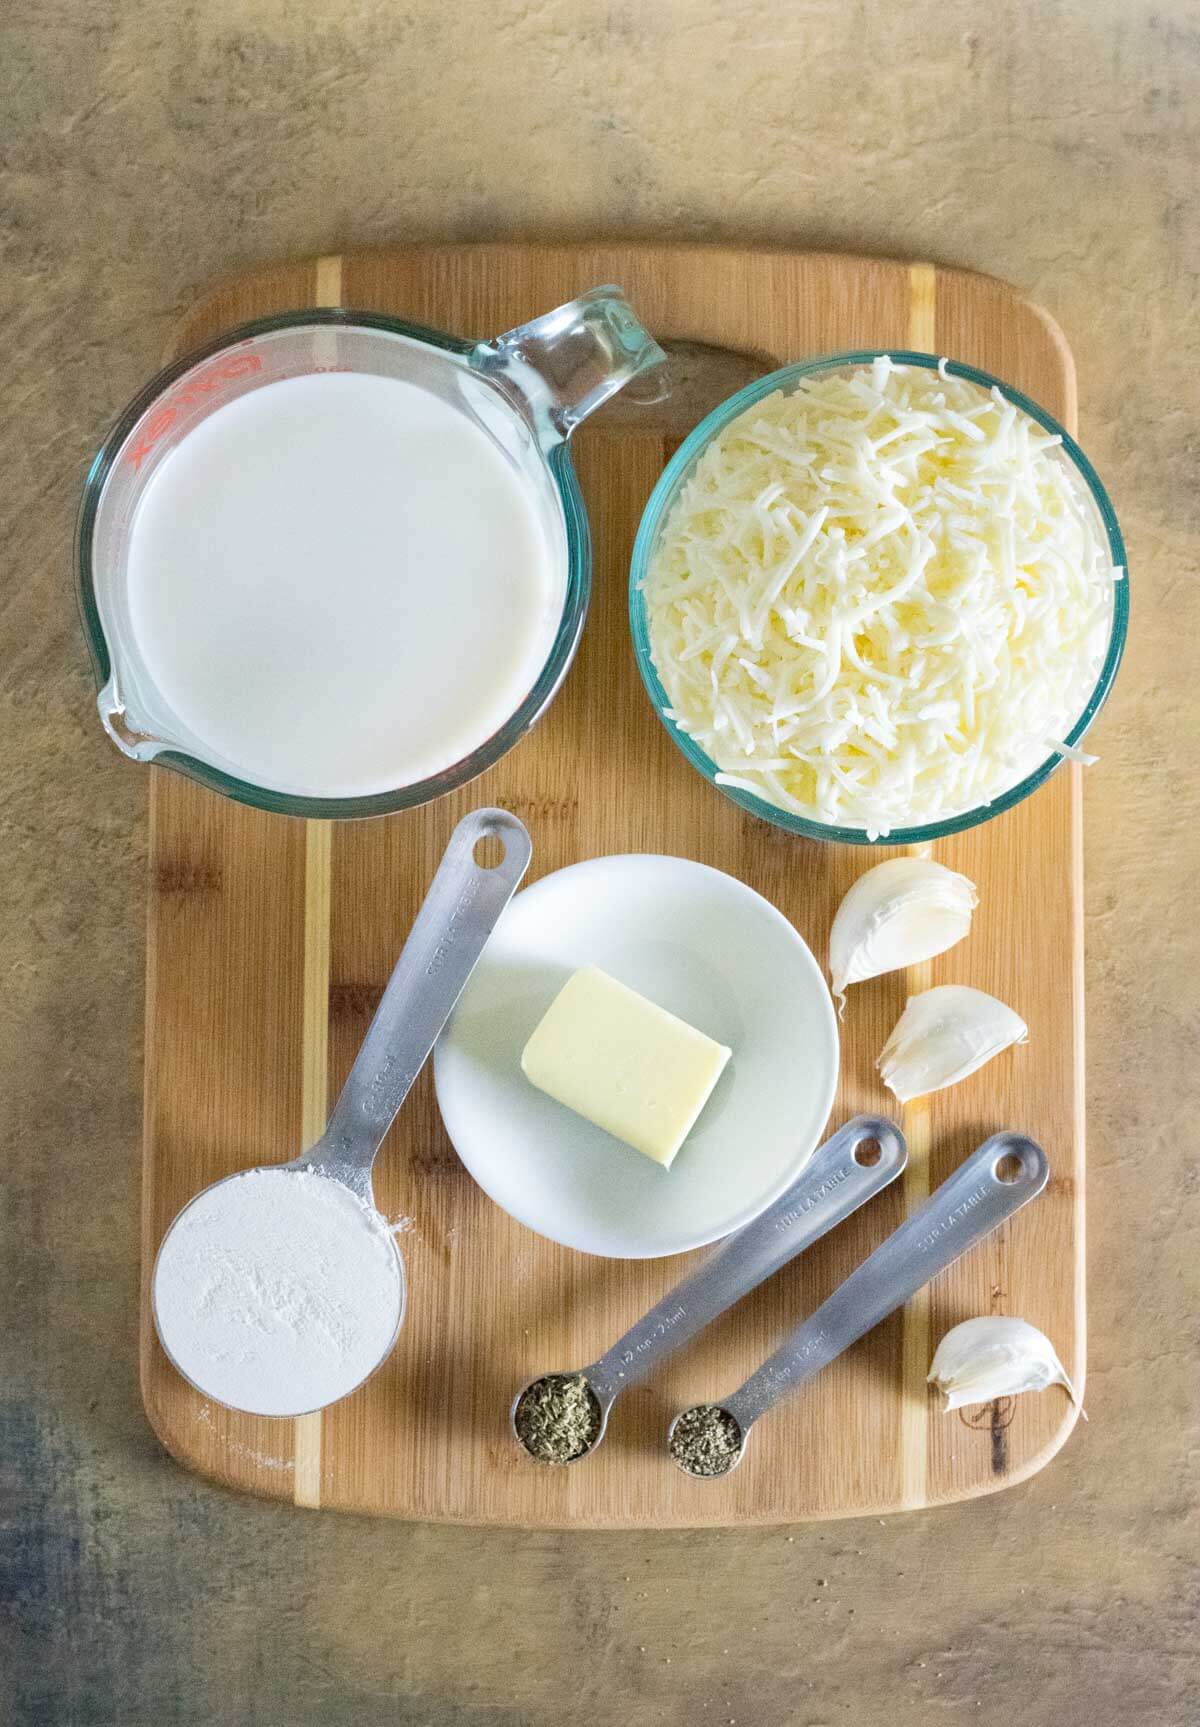 Showing ingredients for Alfredo sauce without Parmesan cheese.